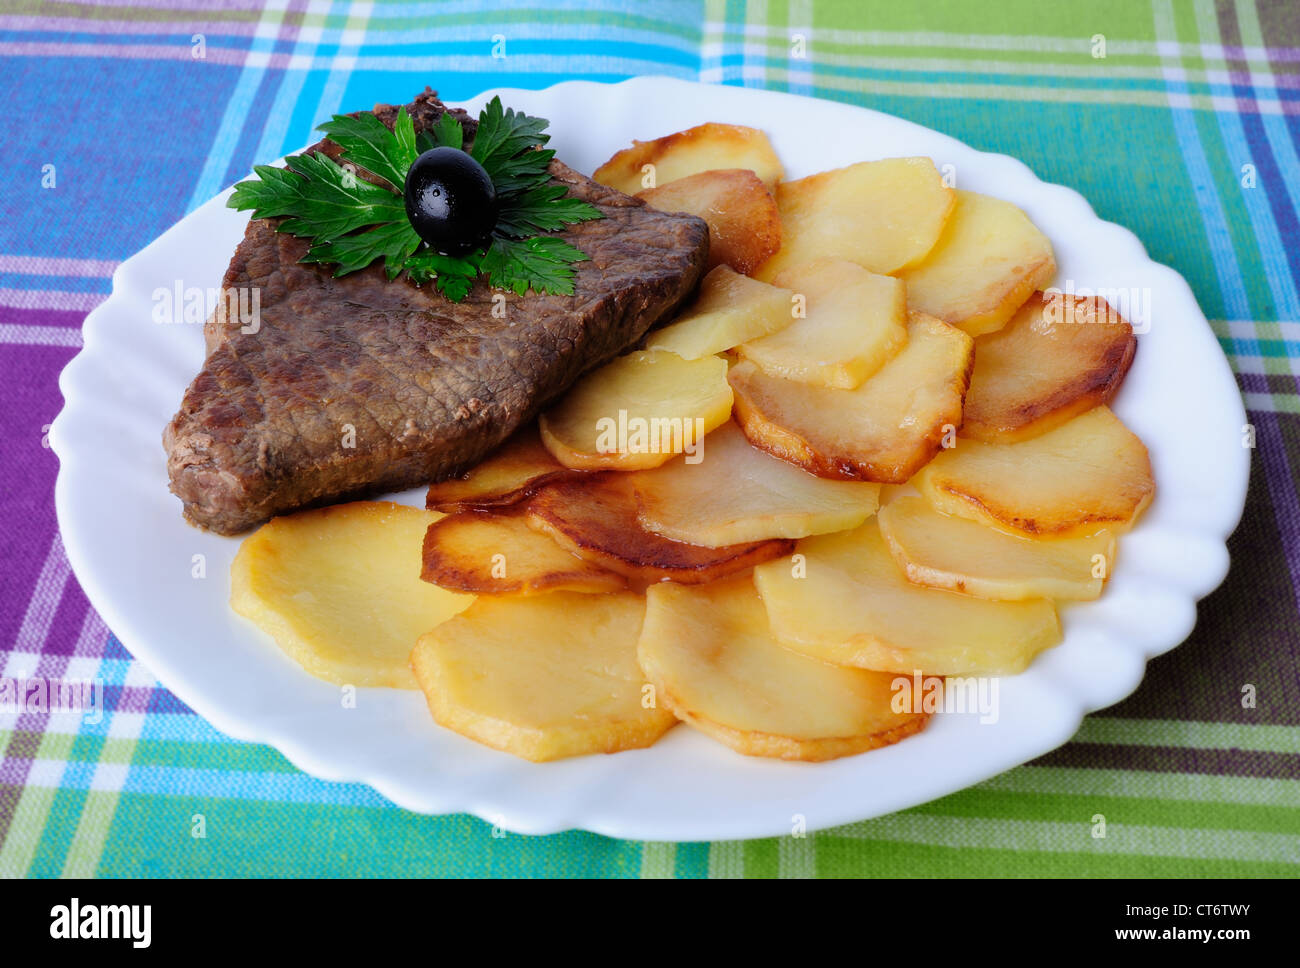 Veal with fried potatoes on a plate Stock Photo